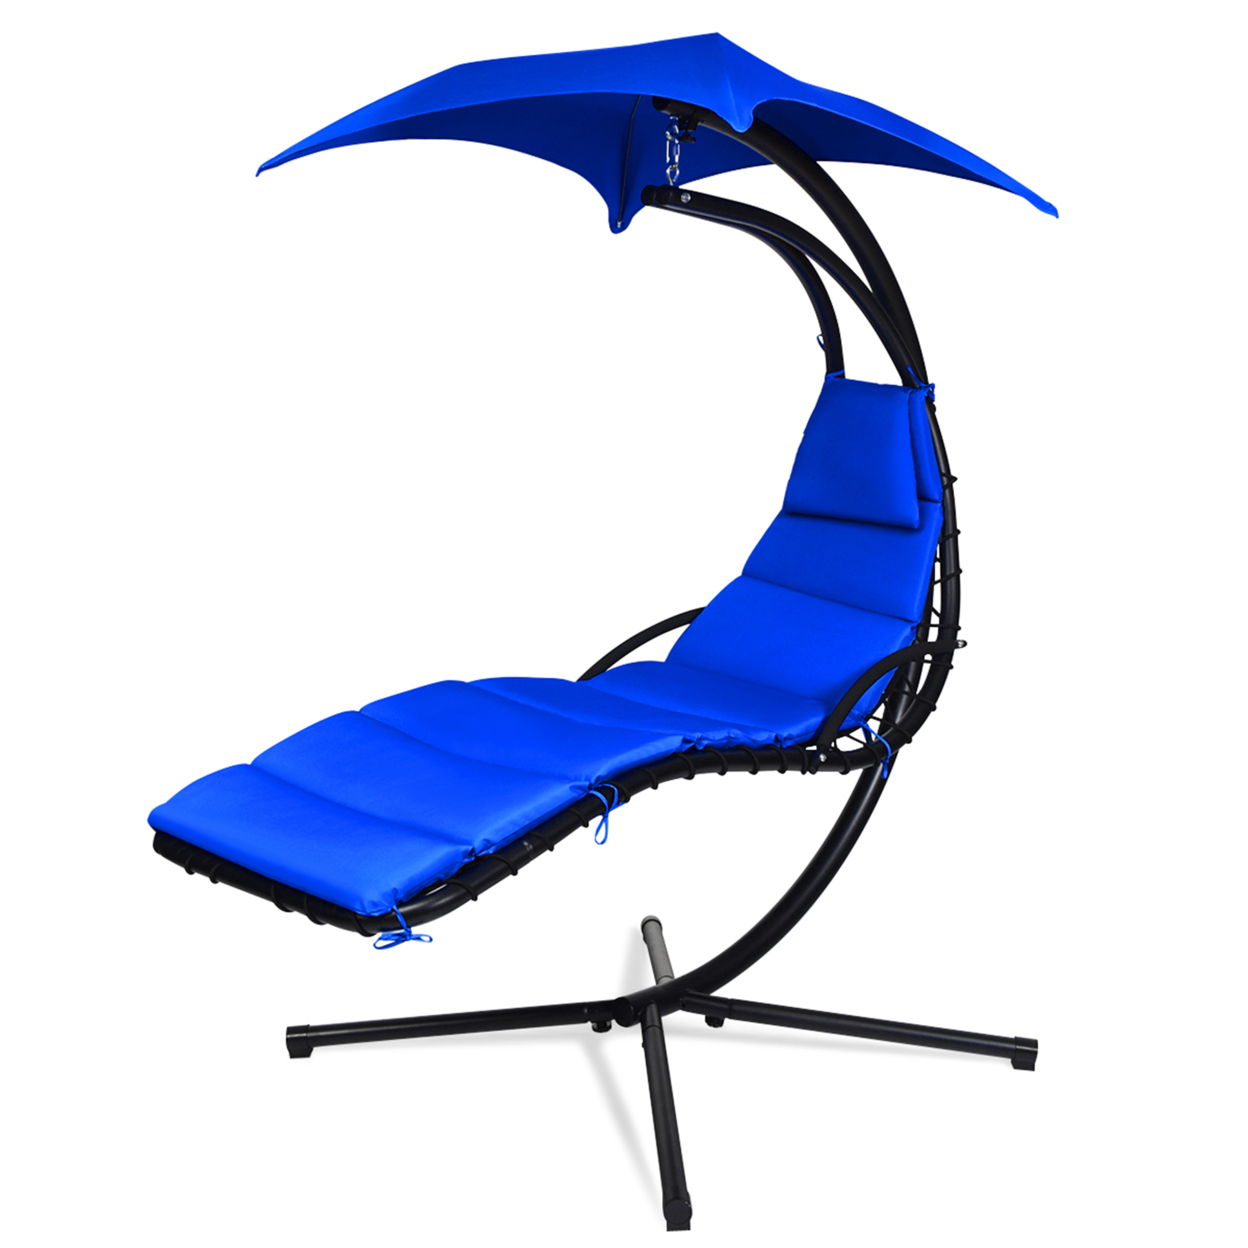 Patio Hammock Swing Chair Hanging Chaise W/ Cushion Pillow Canopy Navy